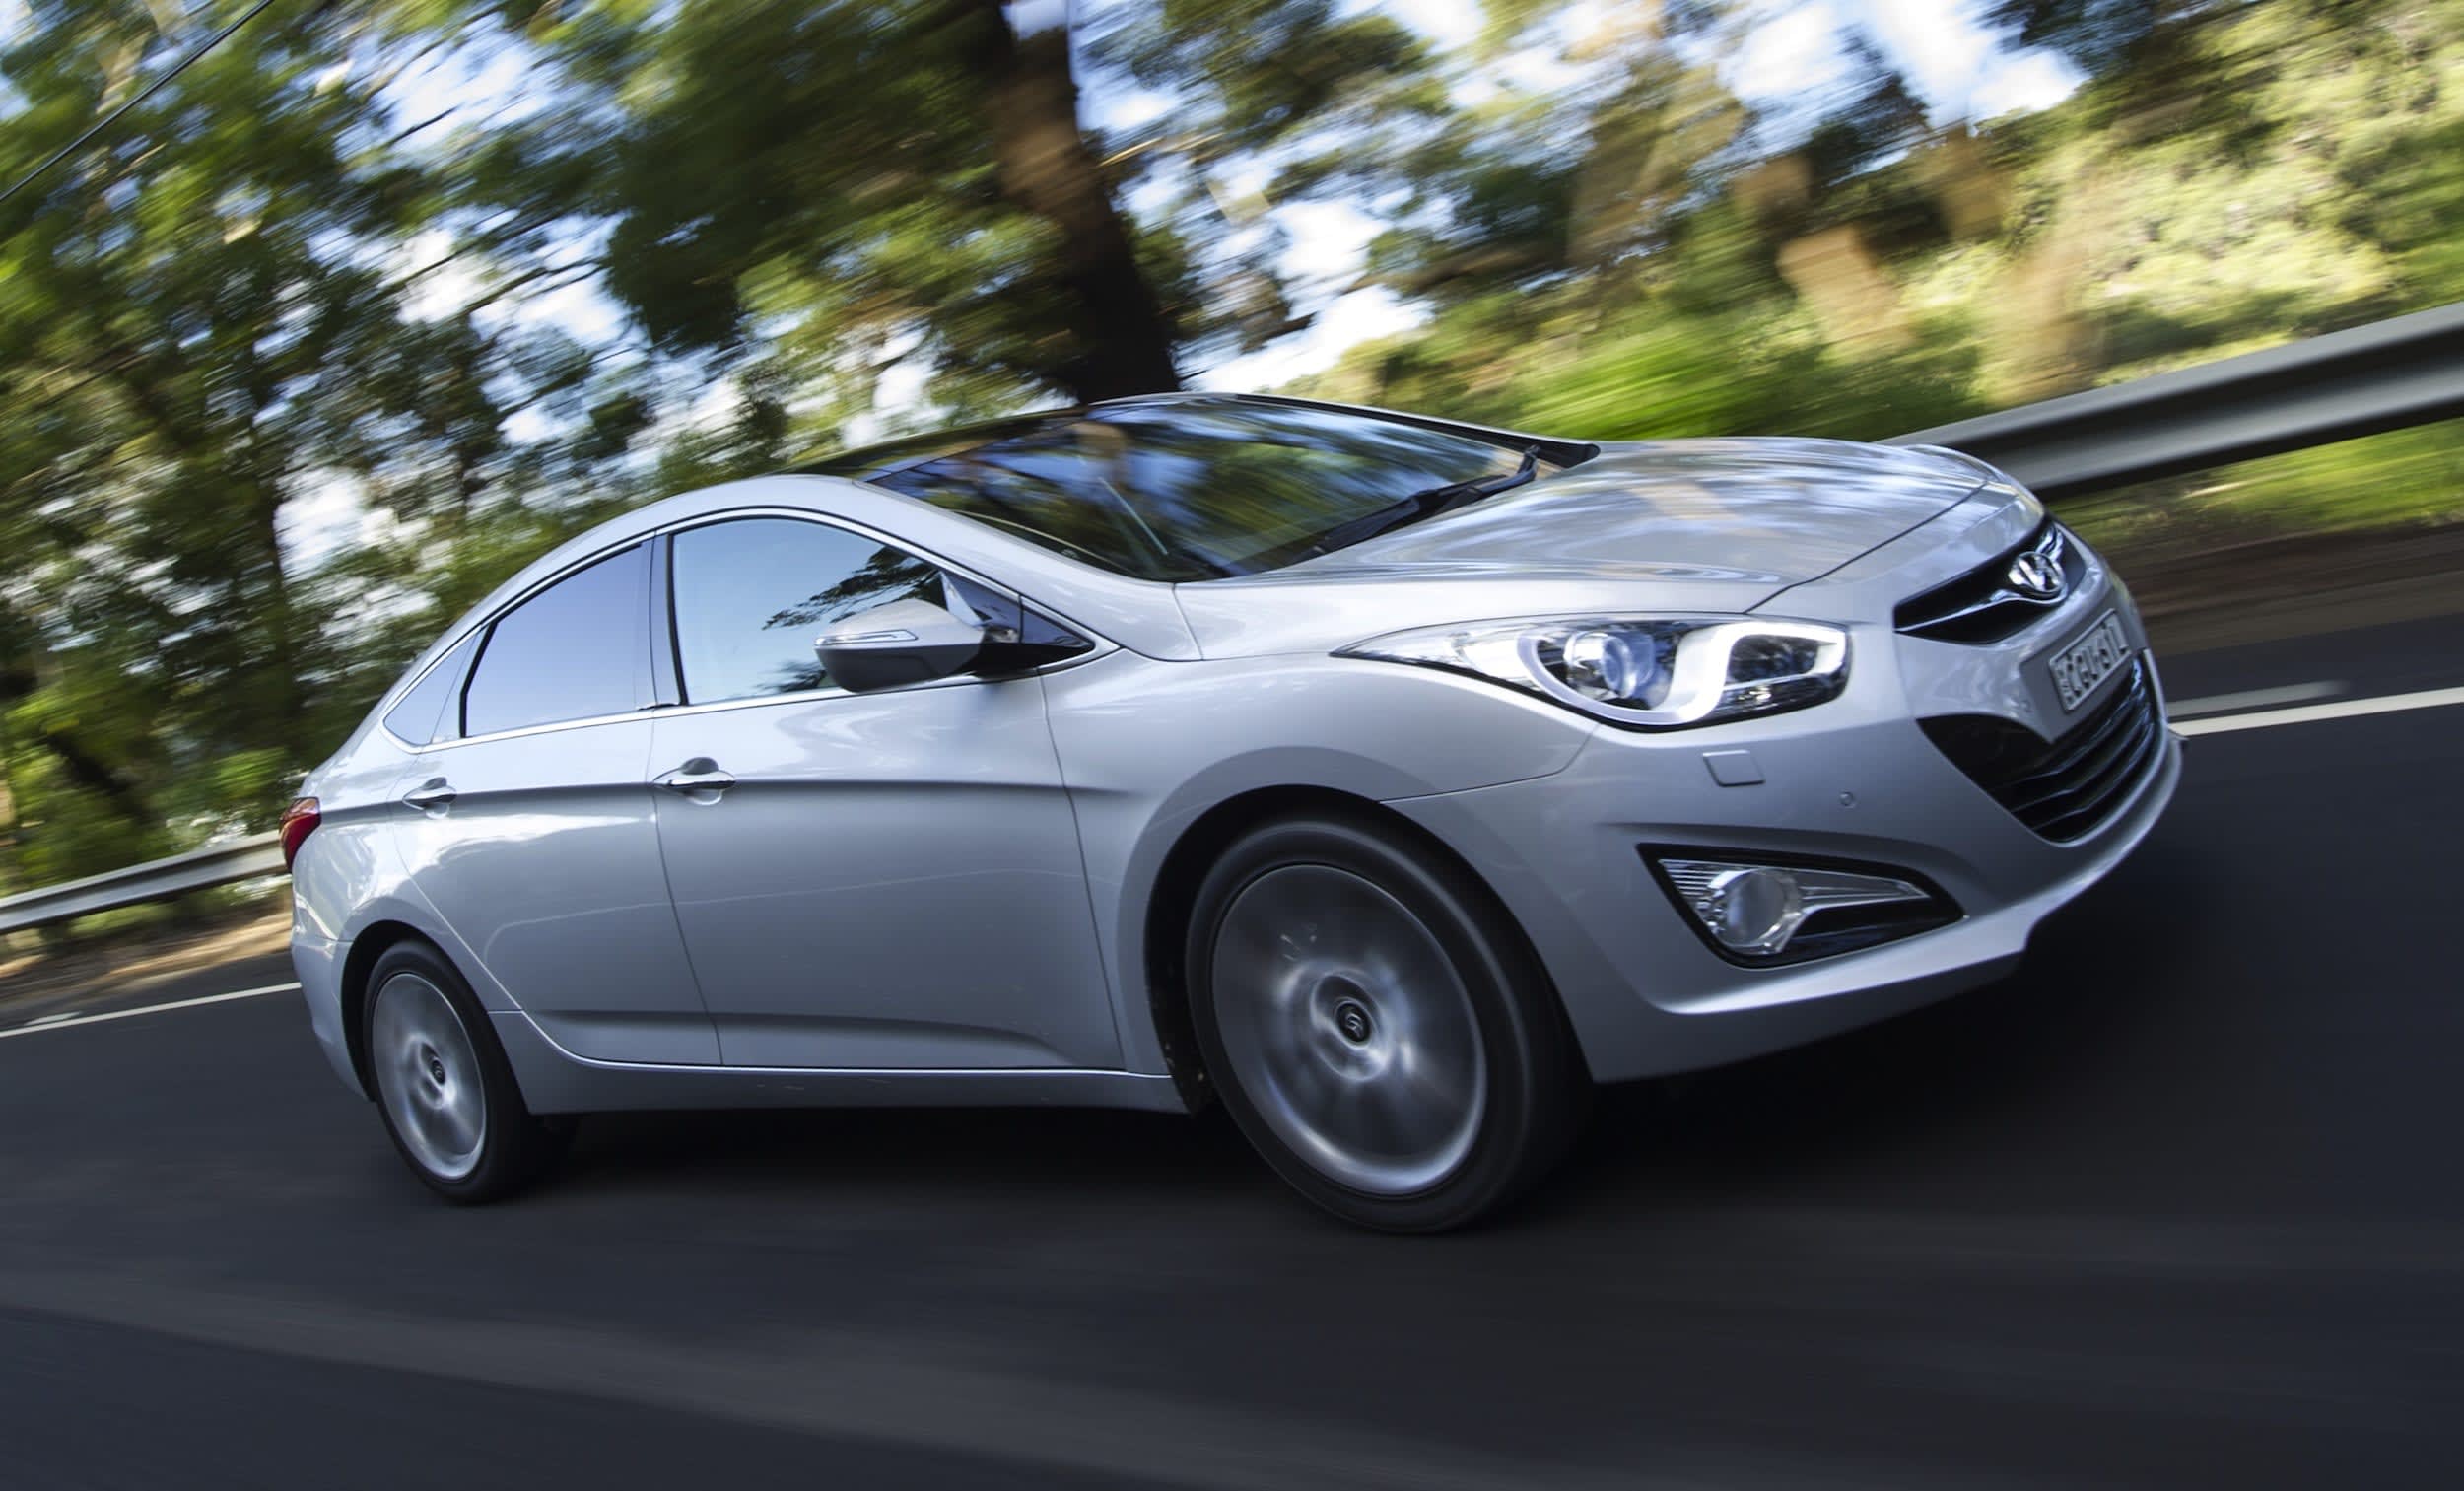 Tuning the Hyundai i40 and best performance parts.